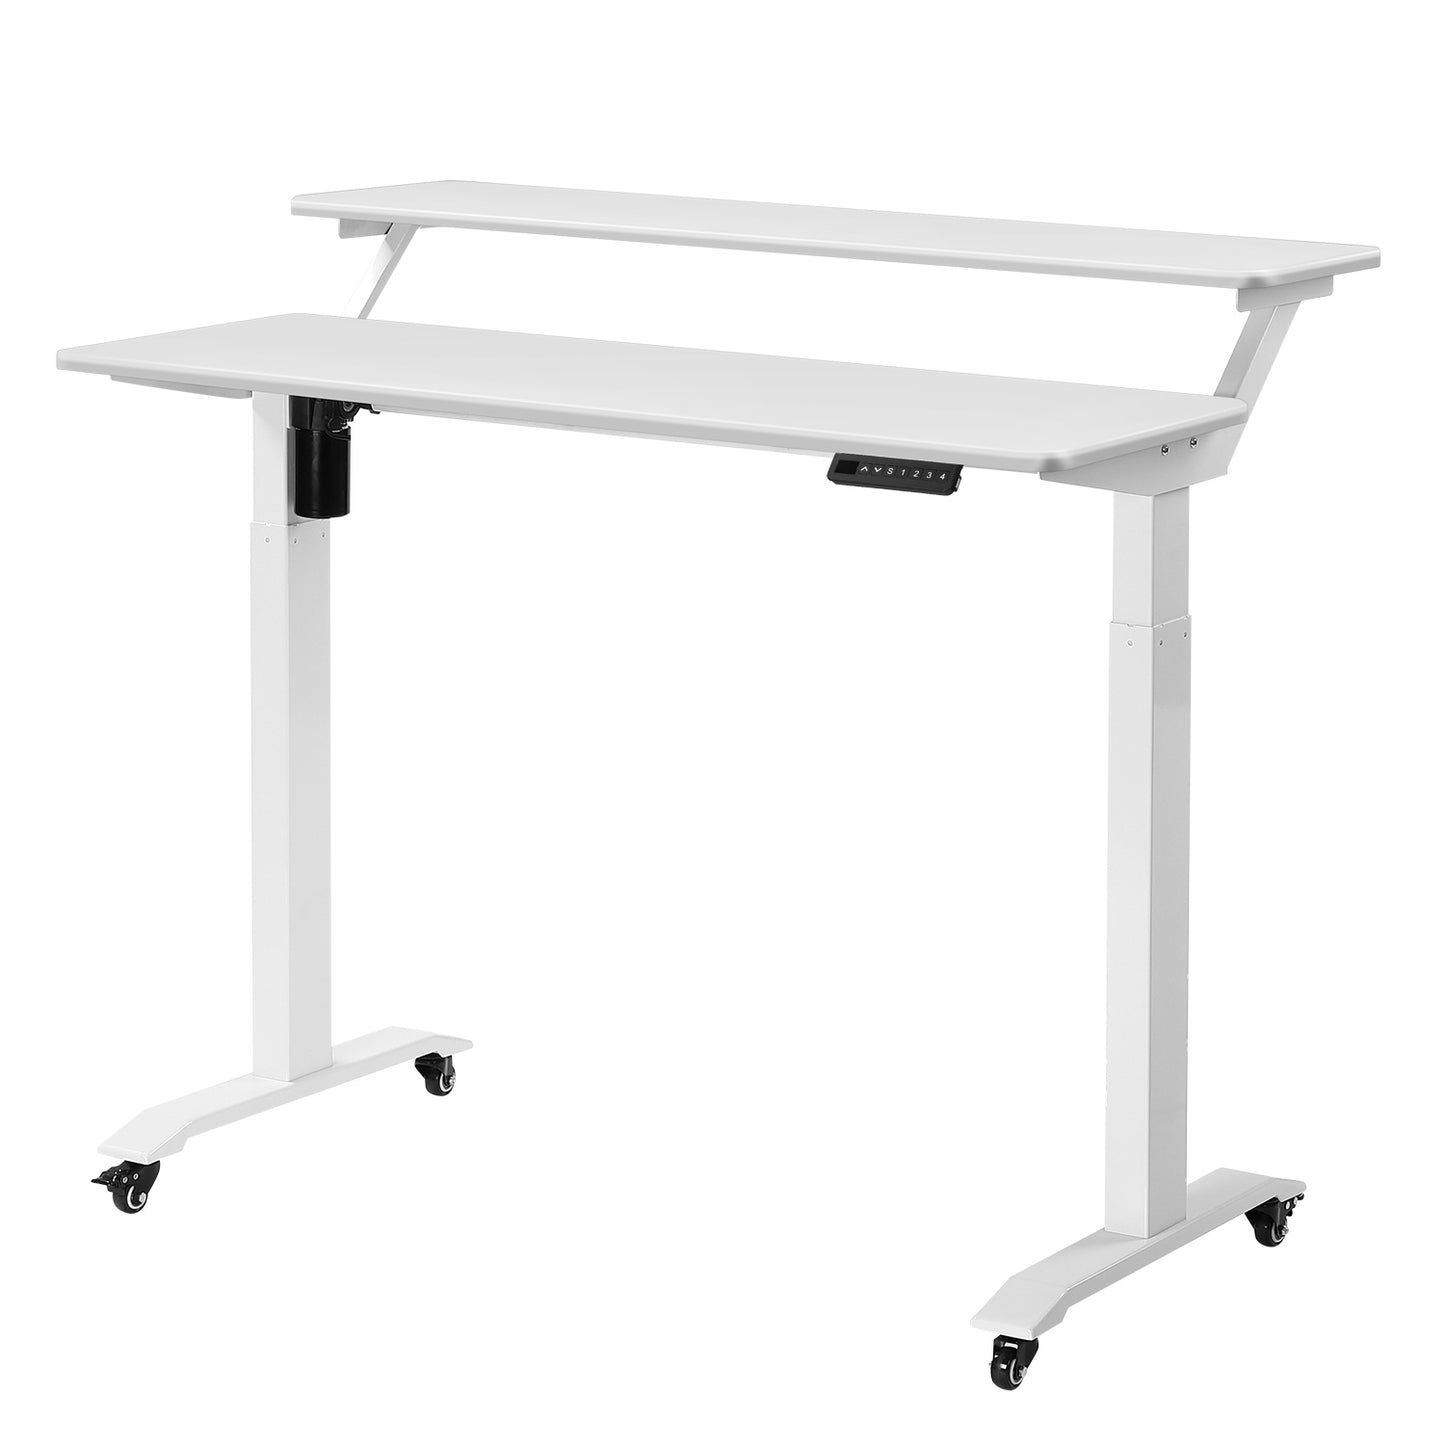 UNICOO - 2 Tier Electric Height Adjustable Standing Desk, Electric Standing Workstation Home Office Sit Stand Up Desk Electric- 2 Tier